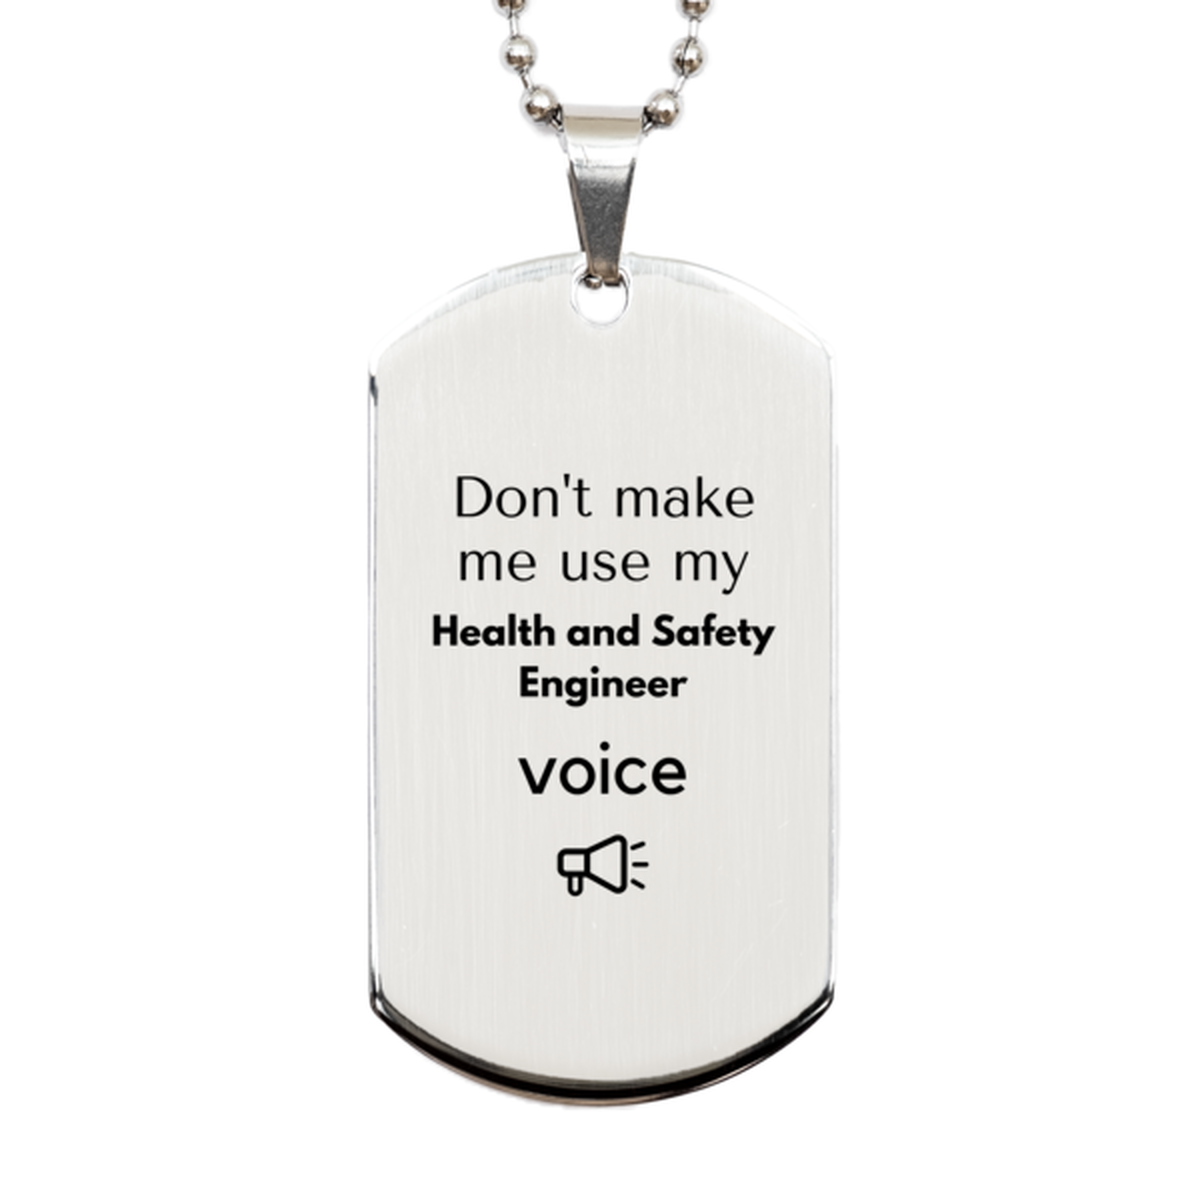 Don't make me use my Health and Safety Engineer voice, Sarcasm Health and Safety Engineer Gifts, Christmas Health and Safety Engineer Silver Dog Tag Birthday Unique Gifts For Health and Safety Engineer Coworkers, Men, Women, Colleague, Friends